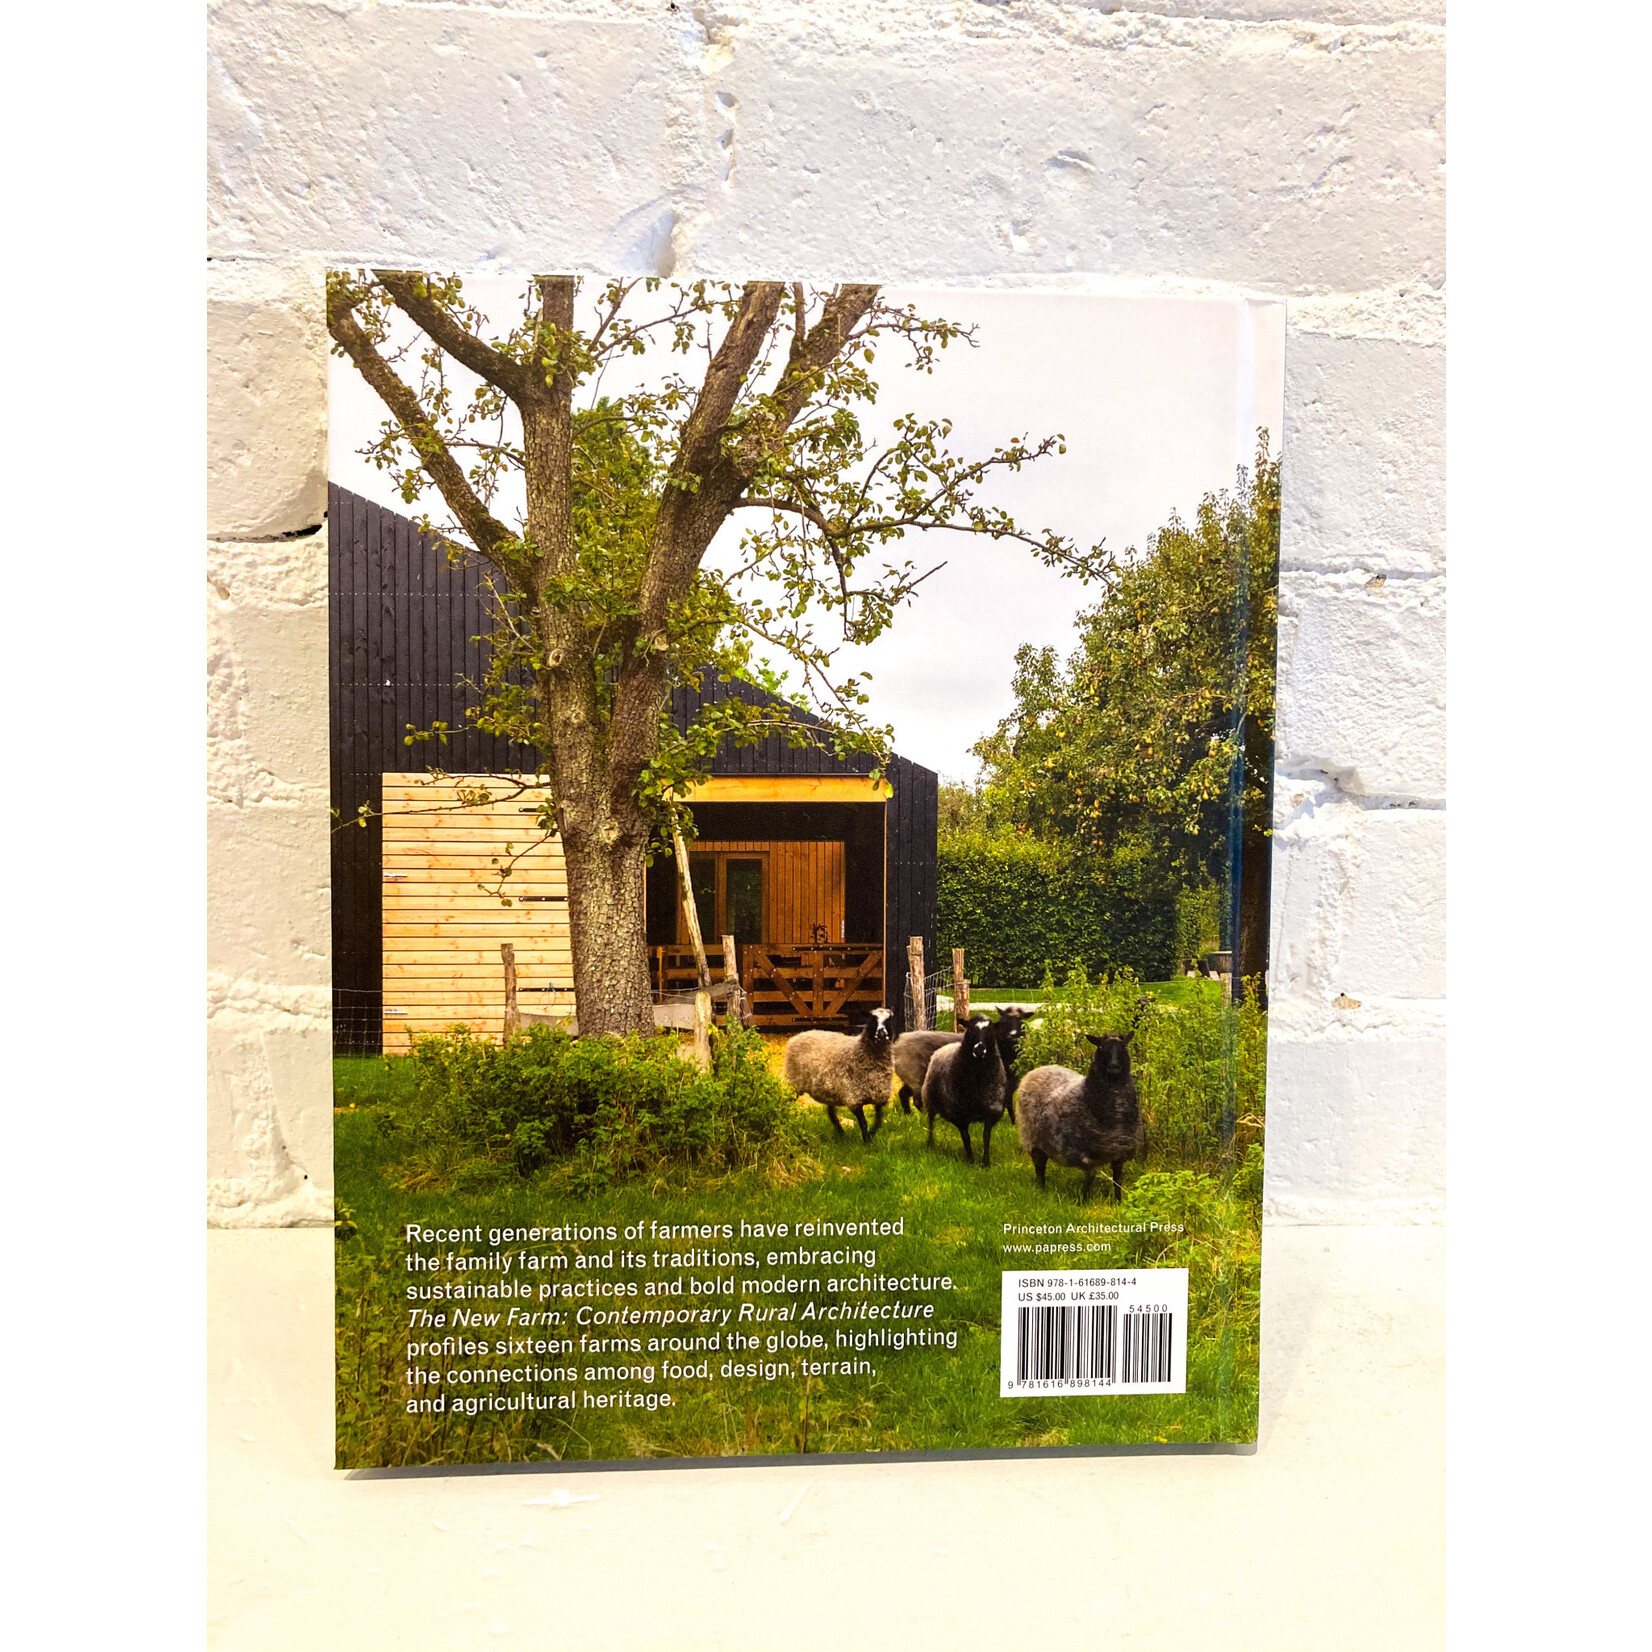 PAP The New Farm: Contemporary Rural Architecture by Daniel P. Gregory